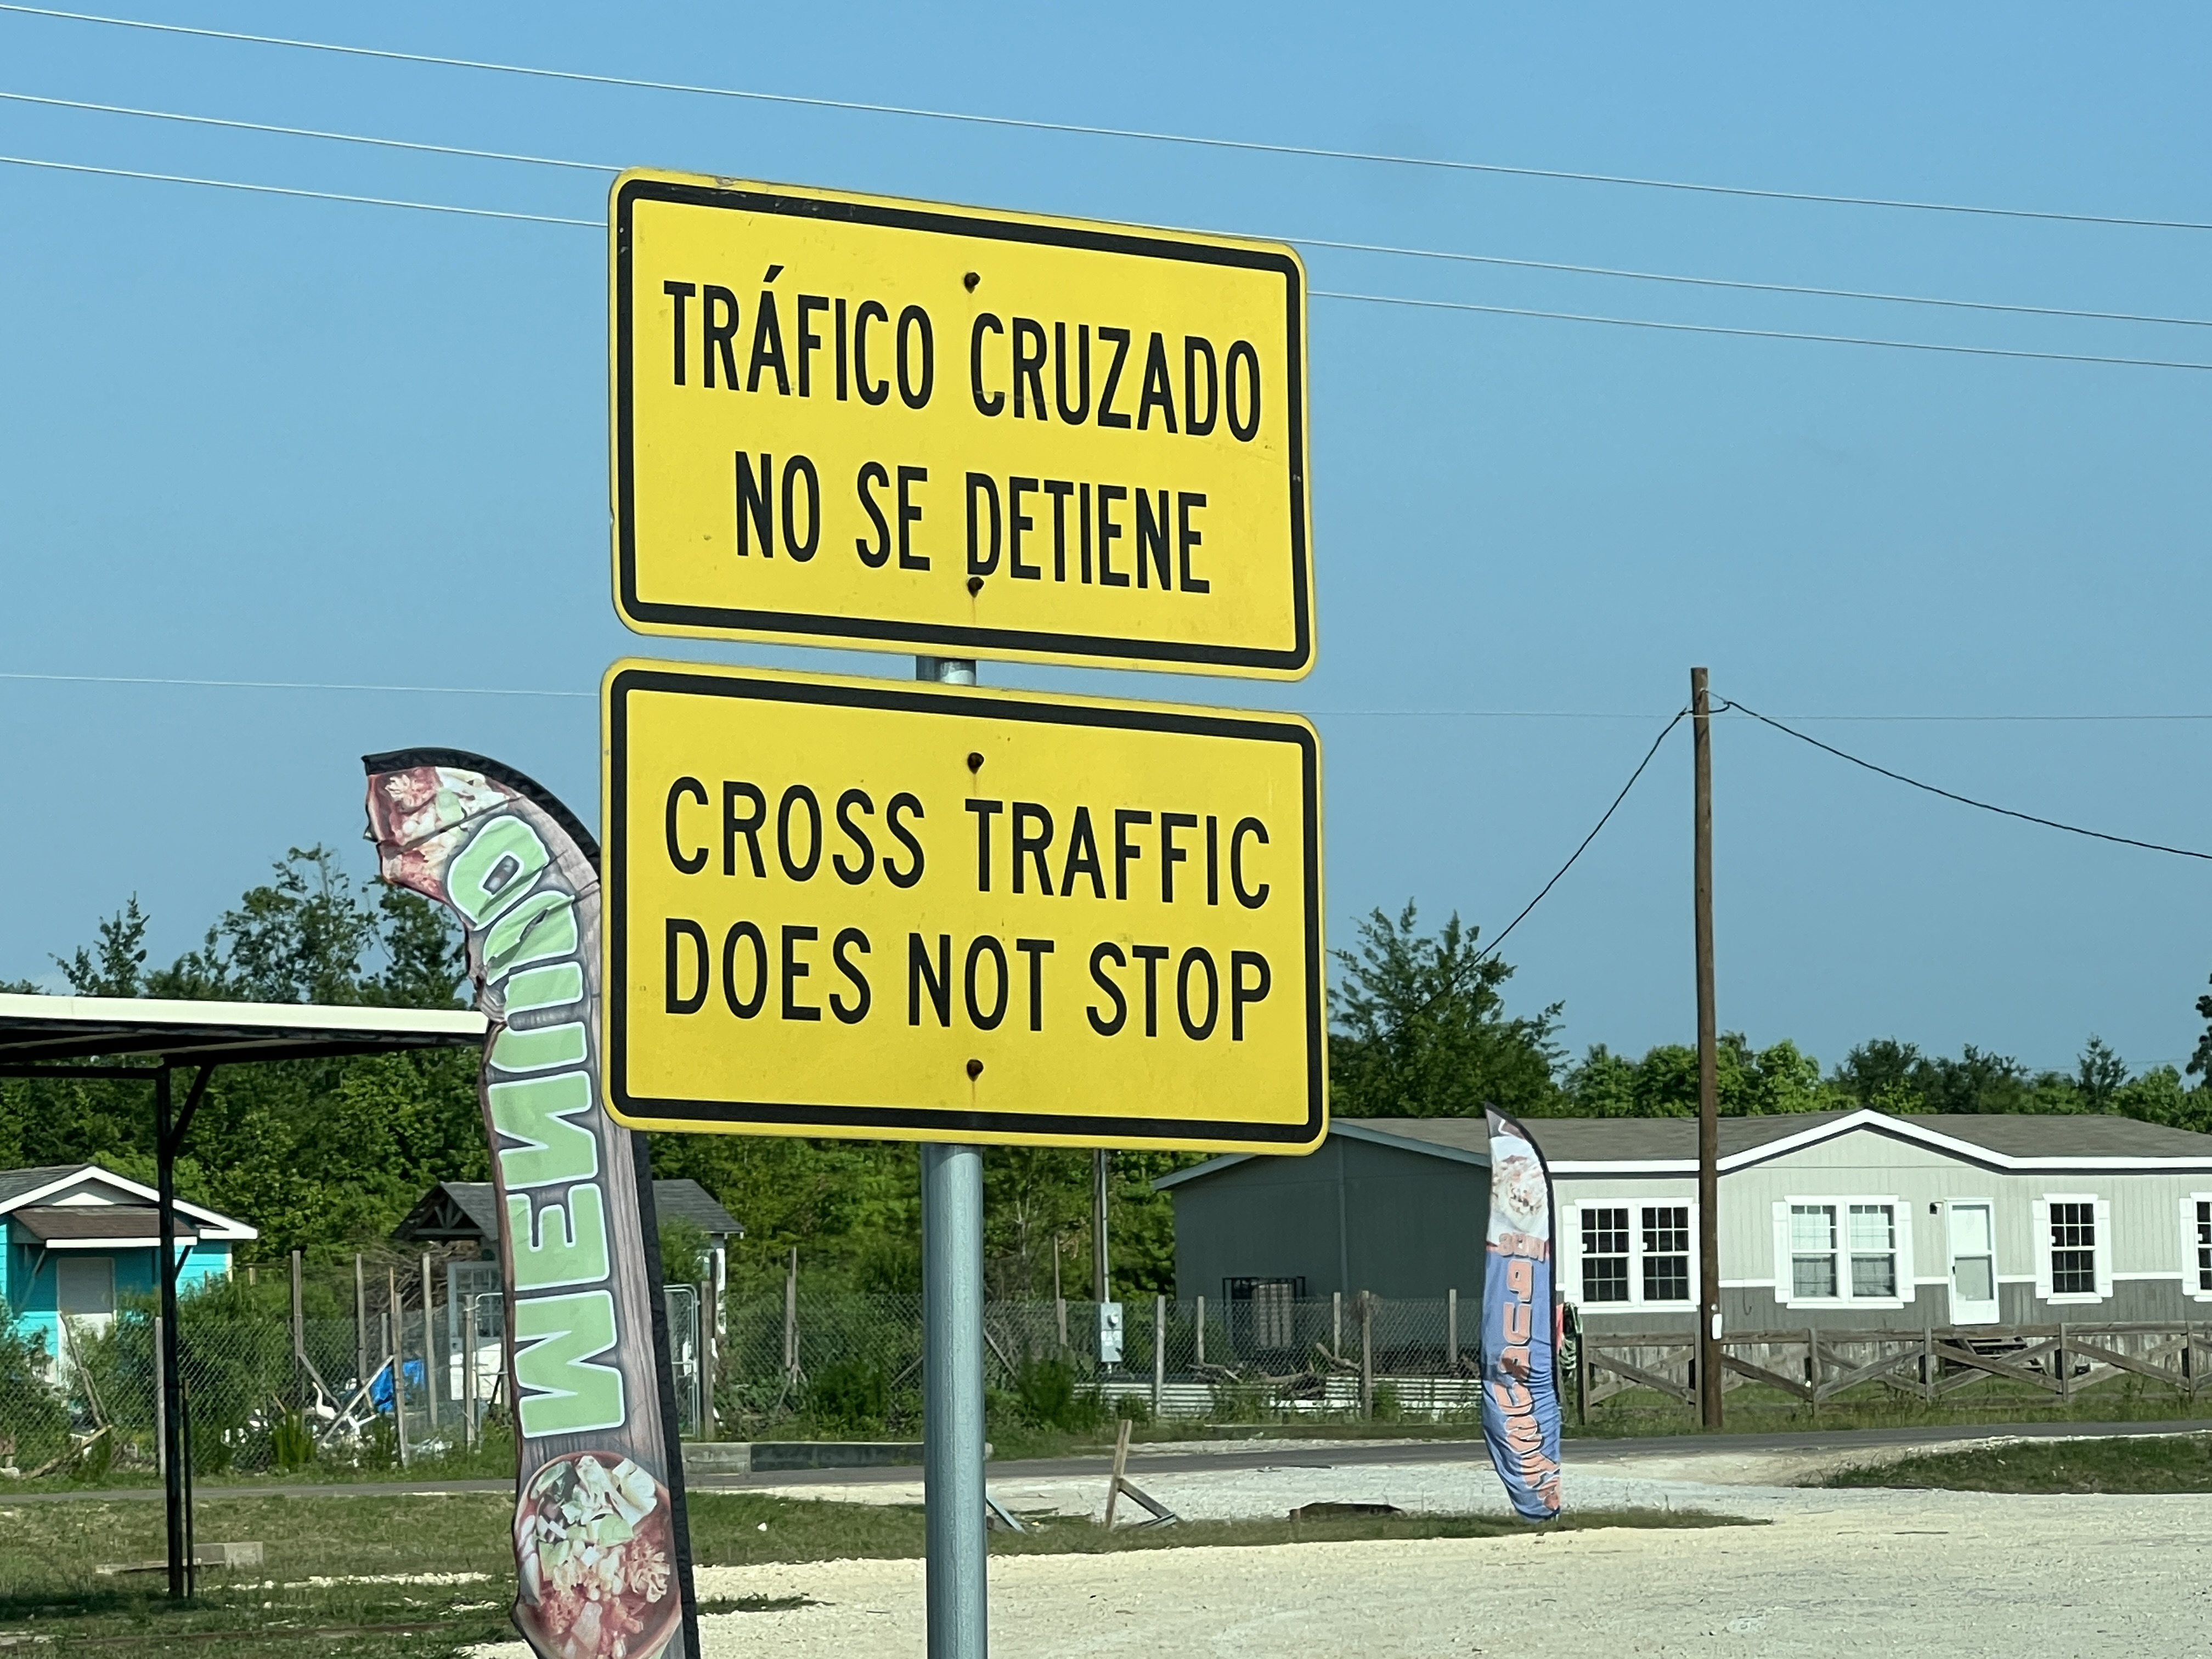 In tacit acknowledgement that large numbers of new Colony Ridge residents speak no or limited English, street signs like this one are often provided in Spanish